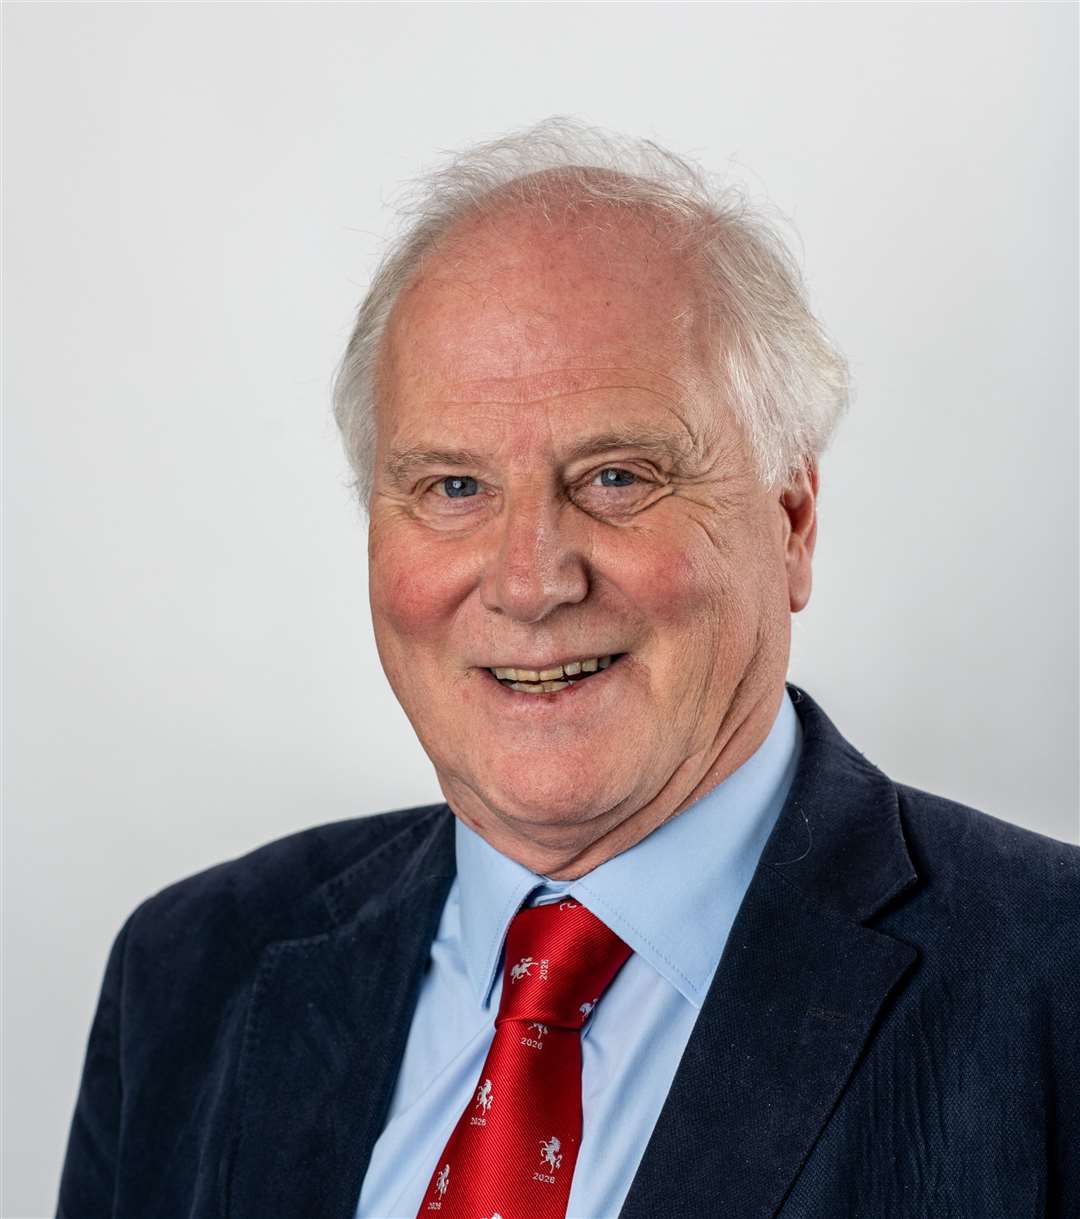 Cllr Simon Reay: Tell us what you think